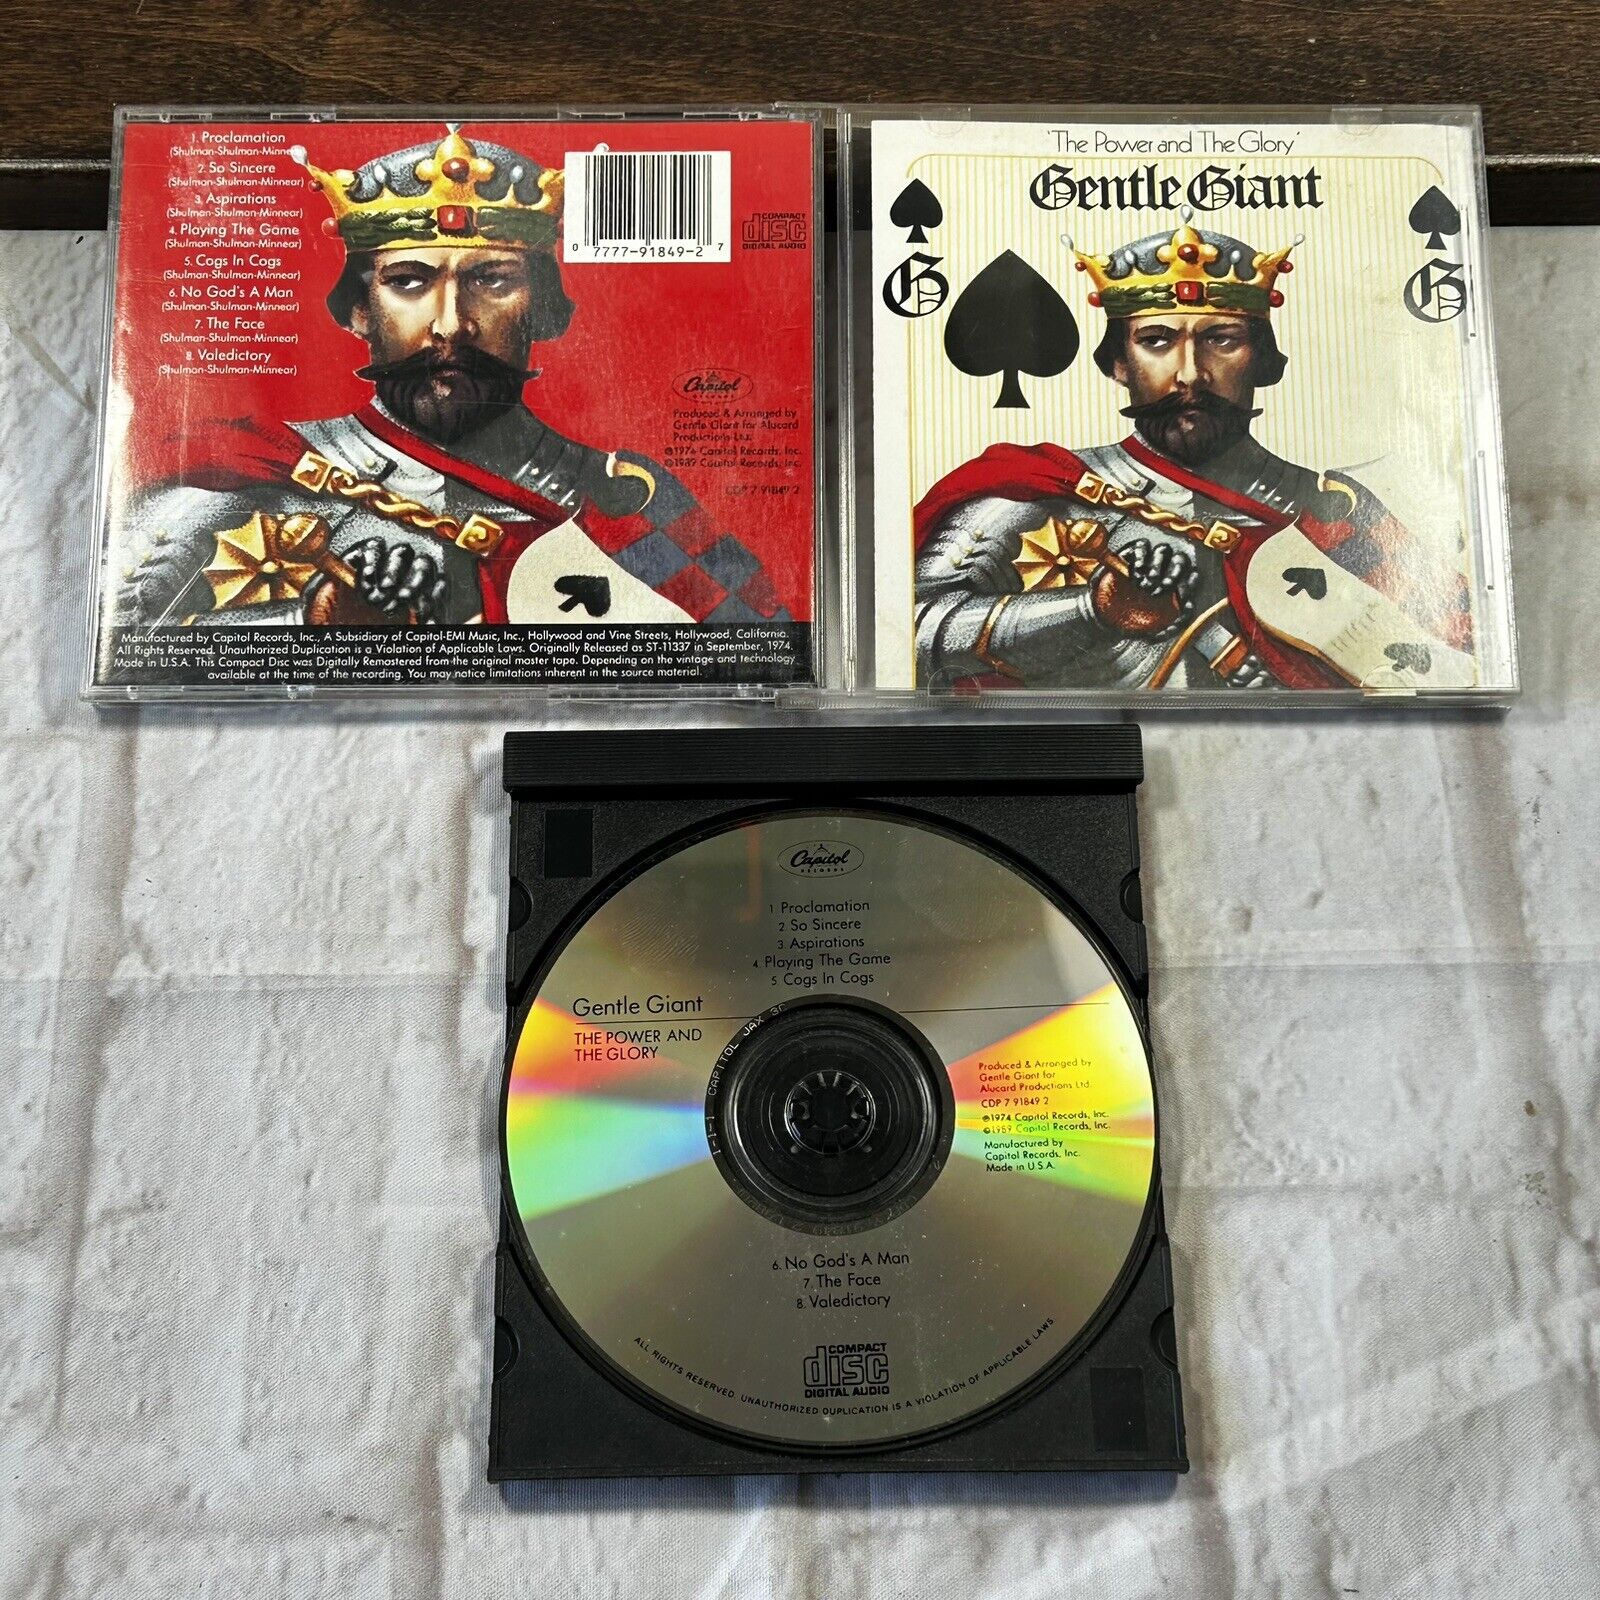 The Power and the Glory Gentle Giant CD Virgin